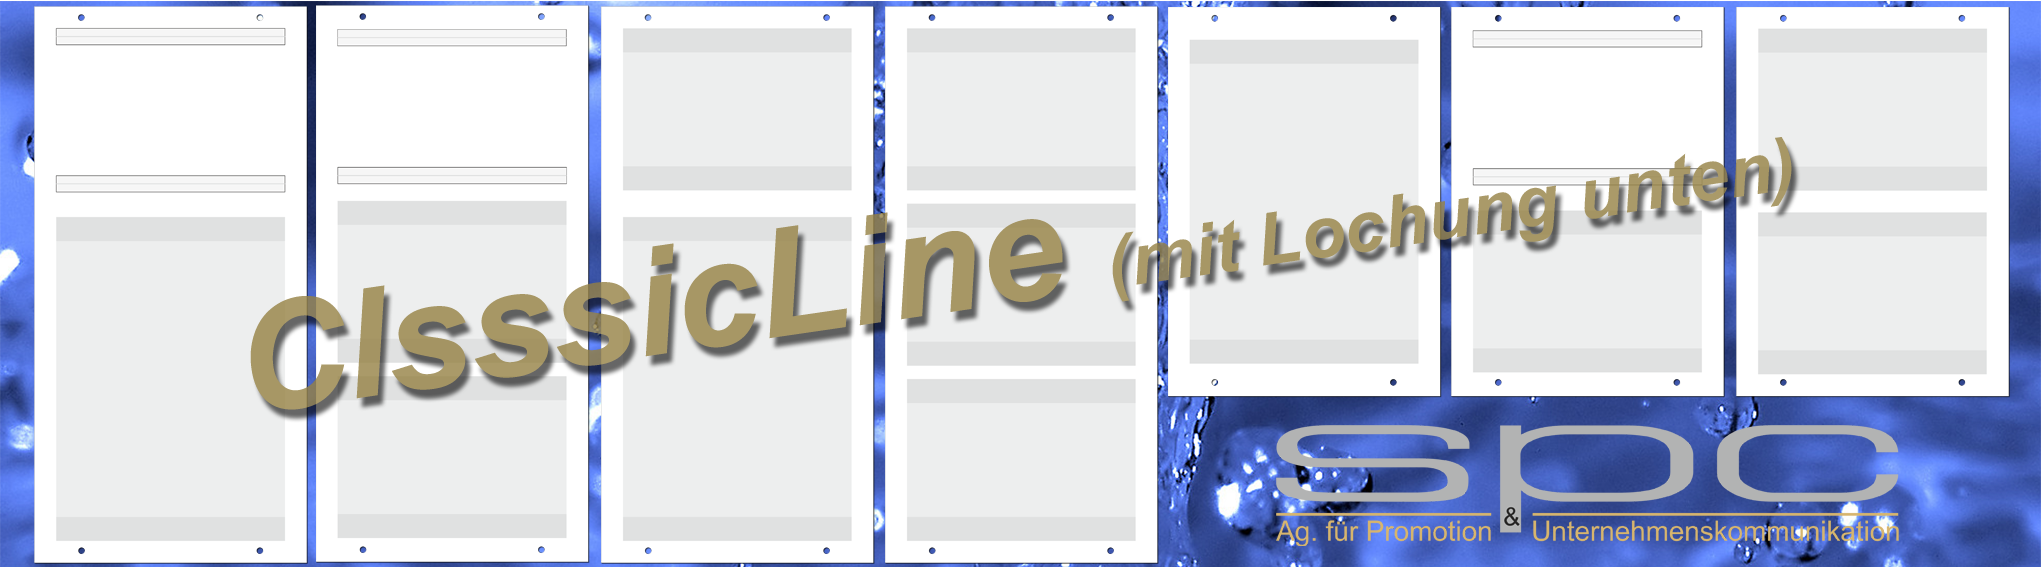 Banner-GS-ClassicLine-mit-Lochung